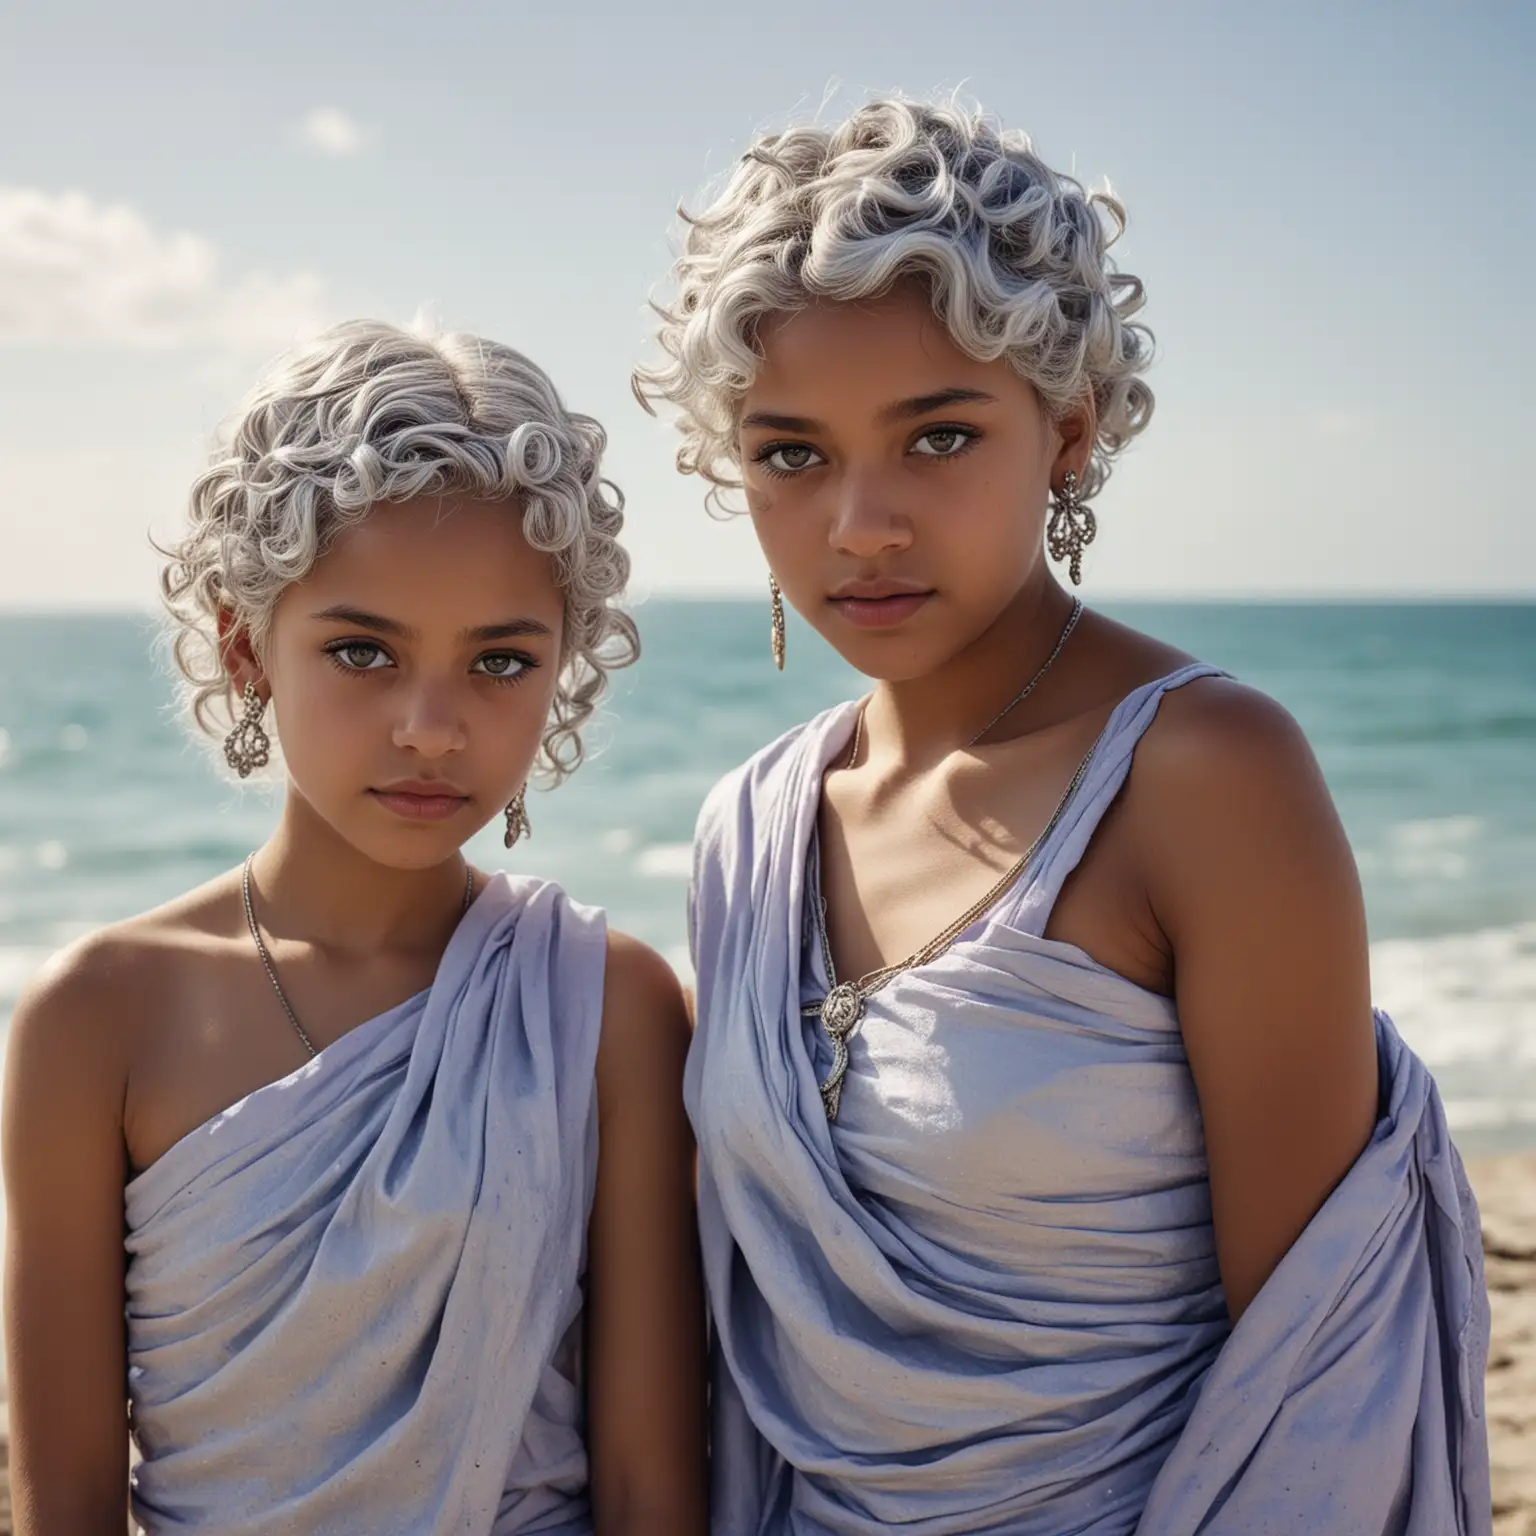 High resolution photo of two twin girls, with silver hair and dark skin. One twin has curly, thick silver hair, short and cut to her ears, and dark purple eyes, wearing a light blue toga gown and heavy jewelry. The other twin has straight white hair and light eyes, wearing a light purple toga gown and delicate jewelry. They’re standing on a patio on the sea, with a sunny background setting, medieval background, , fine art photography style, daylight, 4k